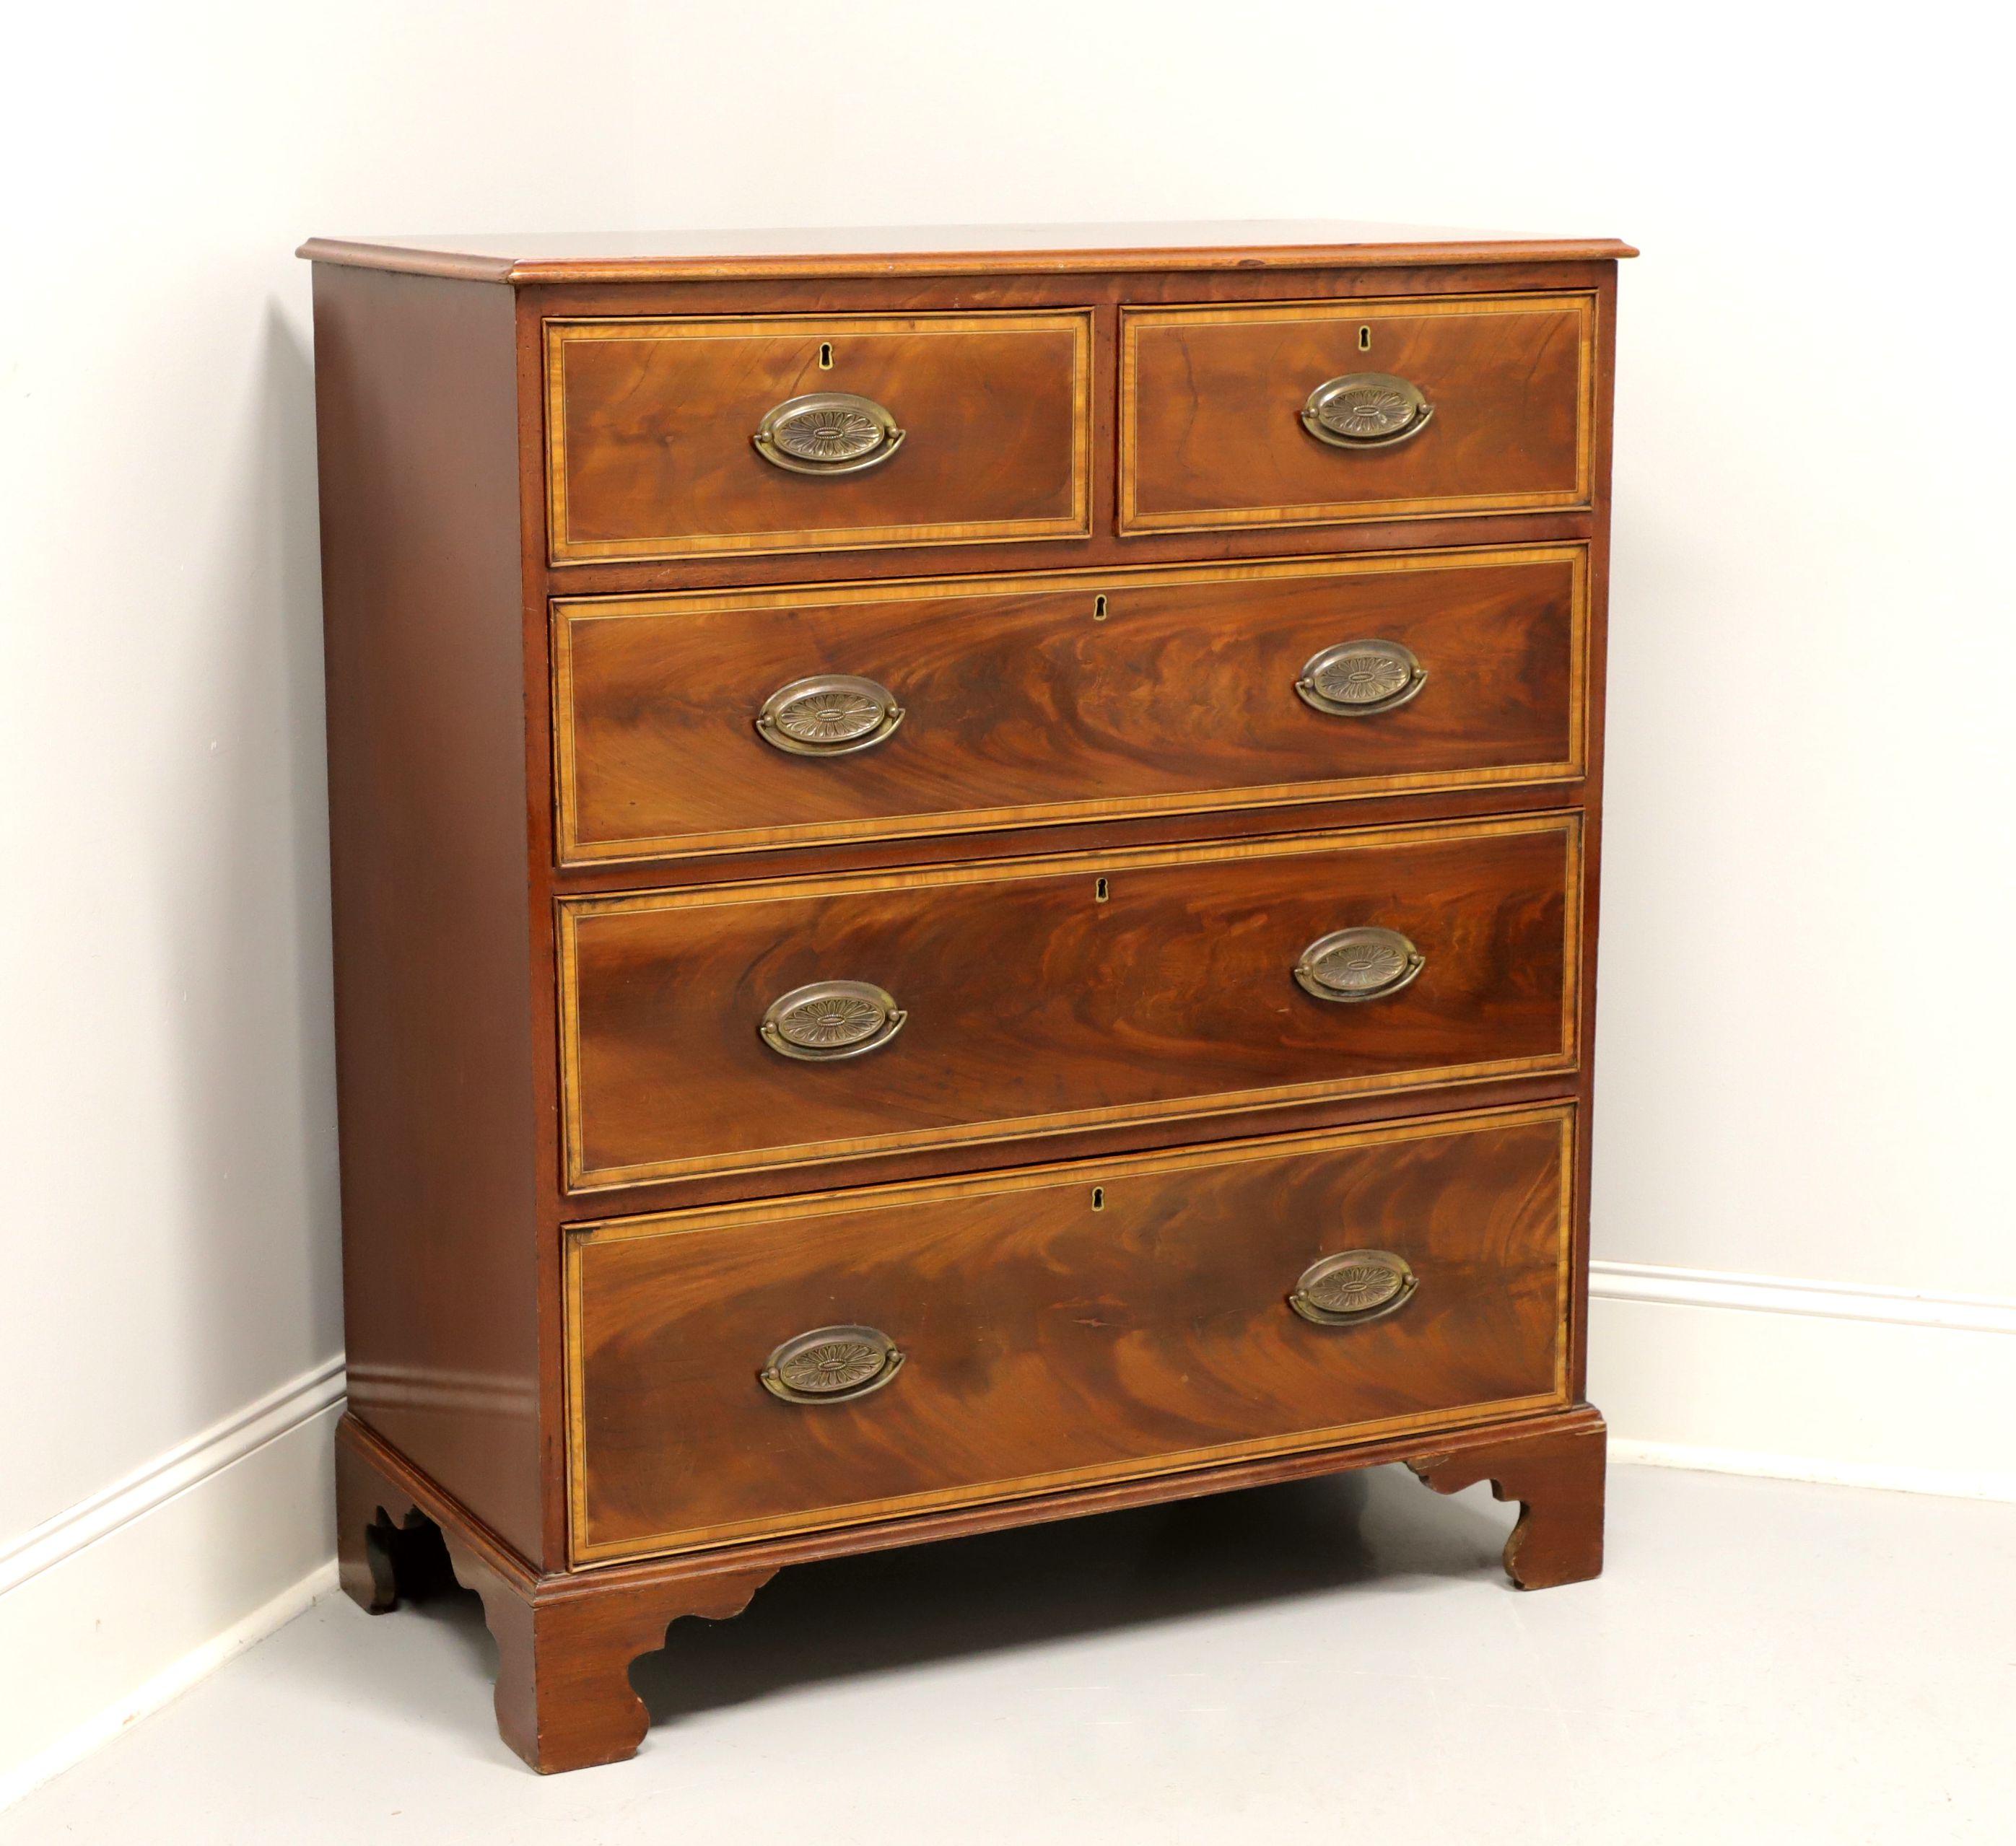 An antique 19th century Georgian style chest of drawers, unbranded. Mahogany with brass hardware, banded top, banded flame mahogany drawer fronts and bracket feet. Features two smaller over three larger drawers of hand dovetailed construction, all